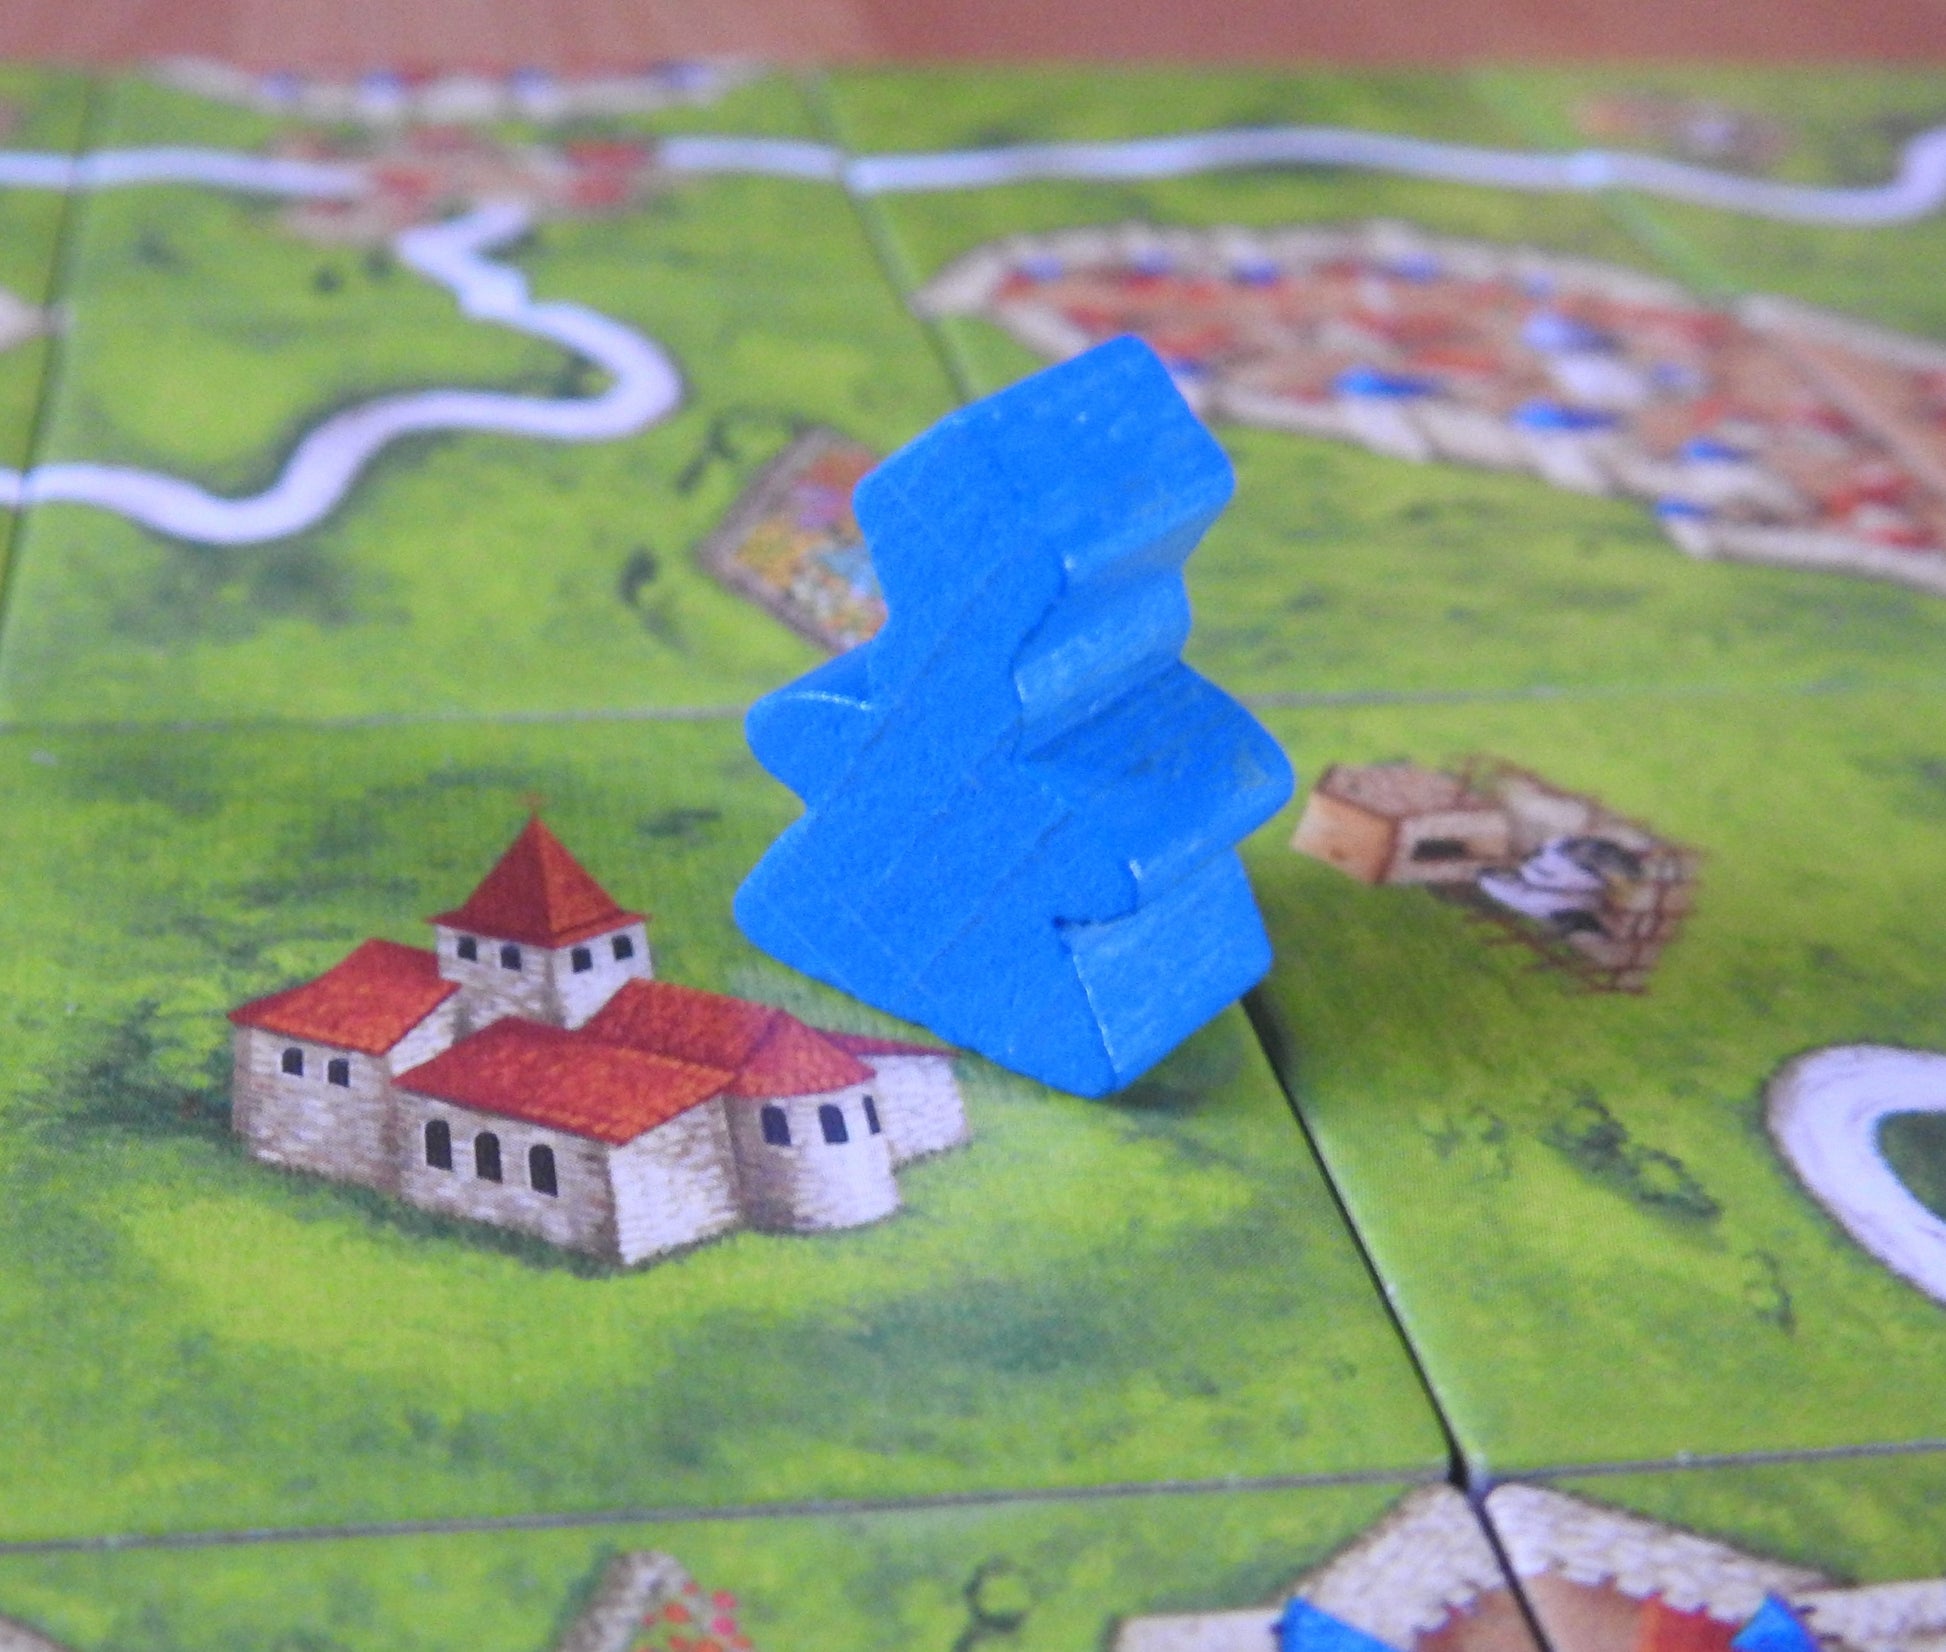 A close-up of a blue wooden abbot meeple.